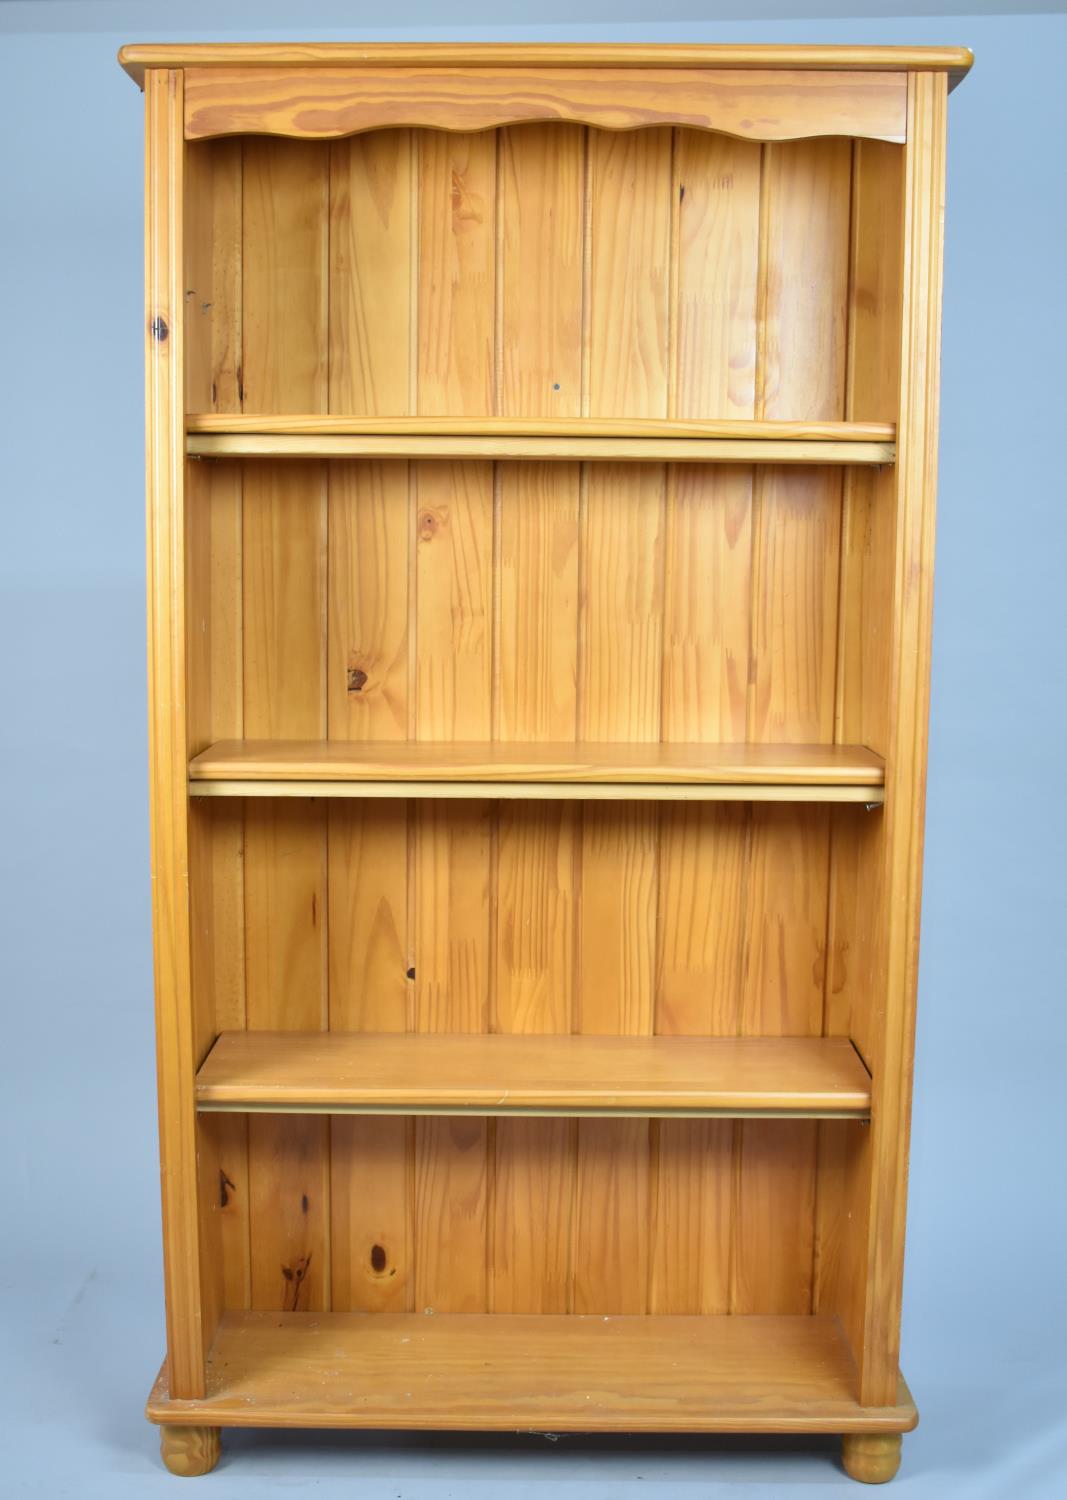 A Modern Four Shelf Open Bookcase, in Need of Some Attention, 79cm wide